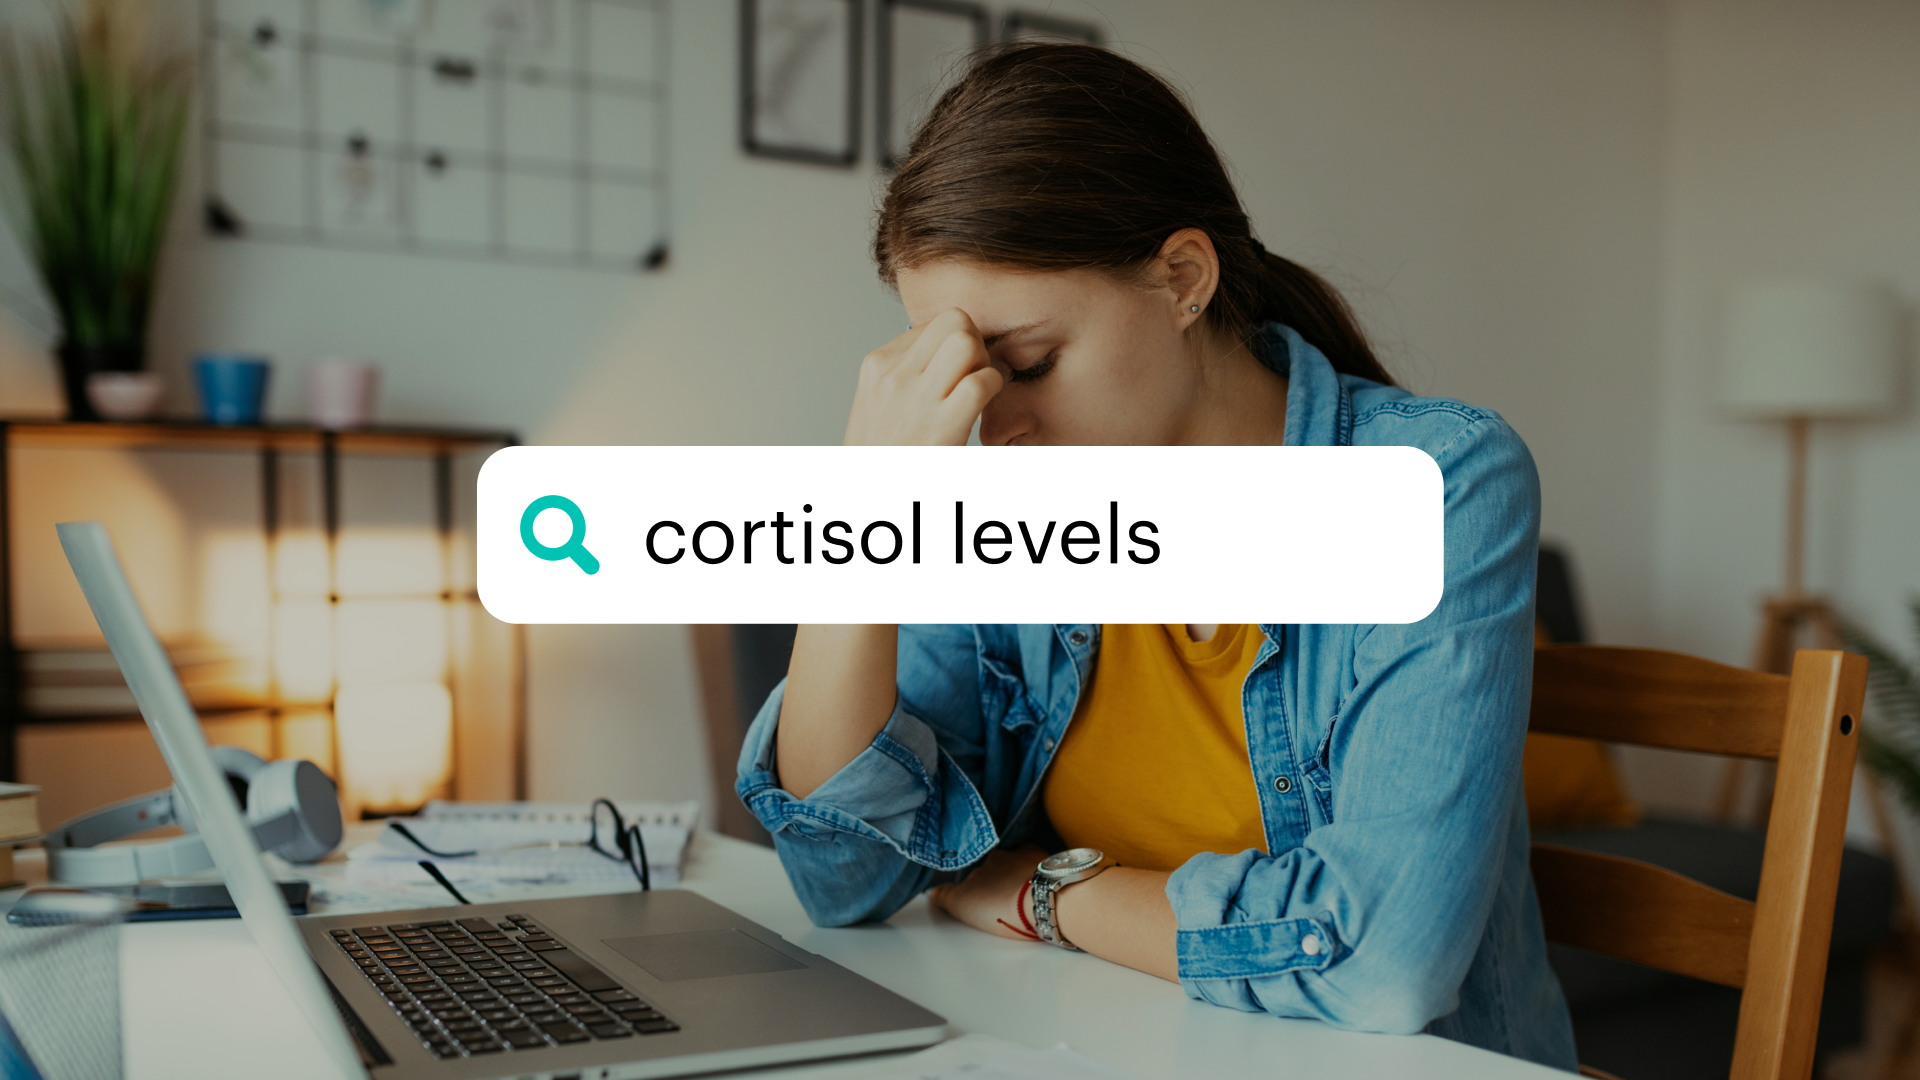 Woman looking stressed at laptop with cortisol levels search bar overlaid